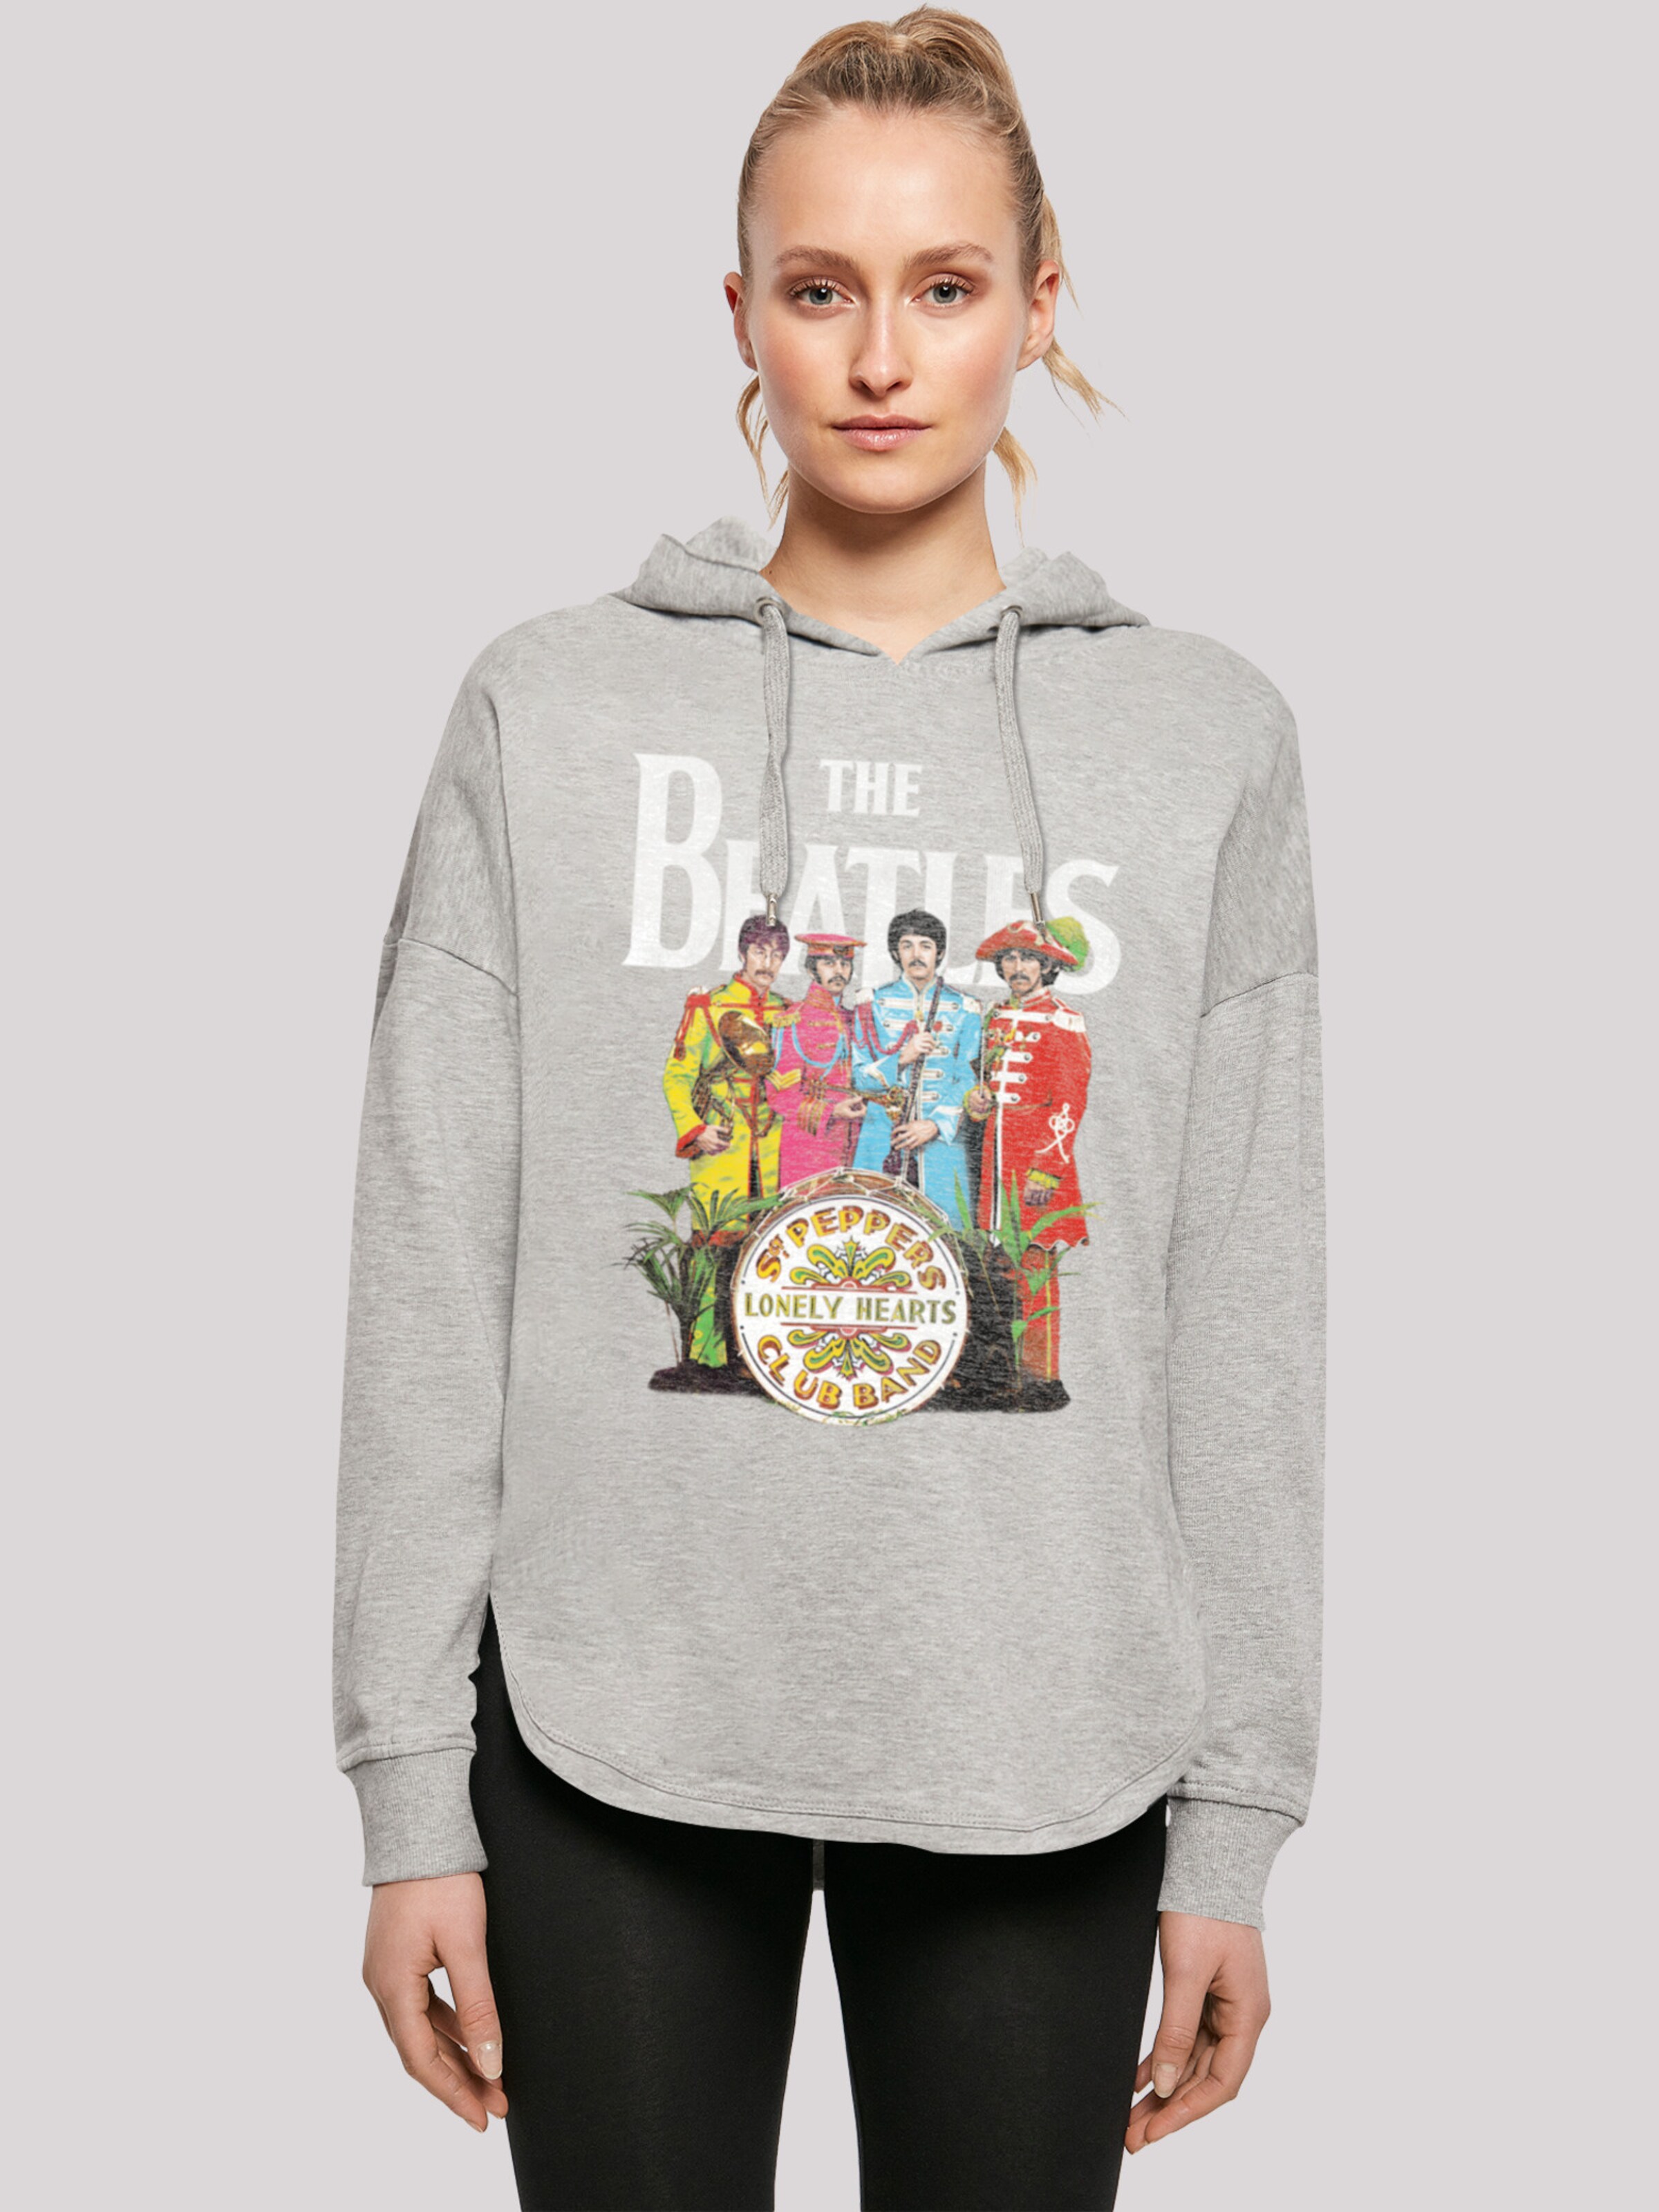 Pepper Black\' in F4NT4STIC Beatles Grau Sgt ABOUT Sweatshirt | YOU Band \'The